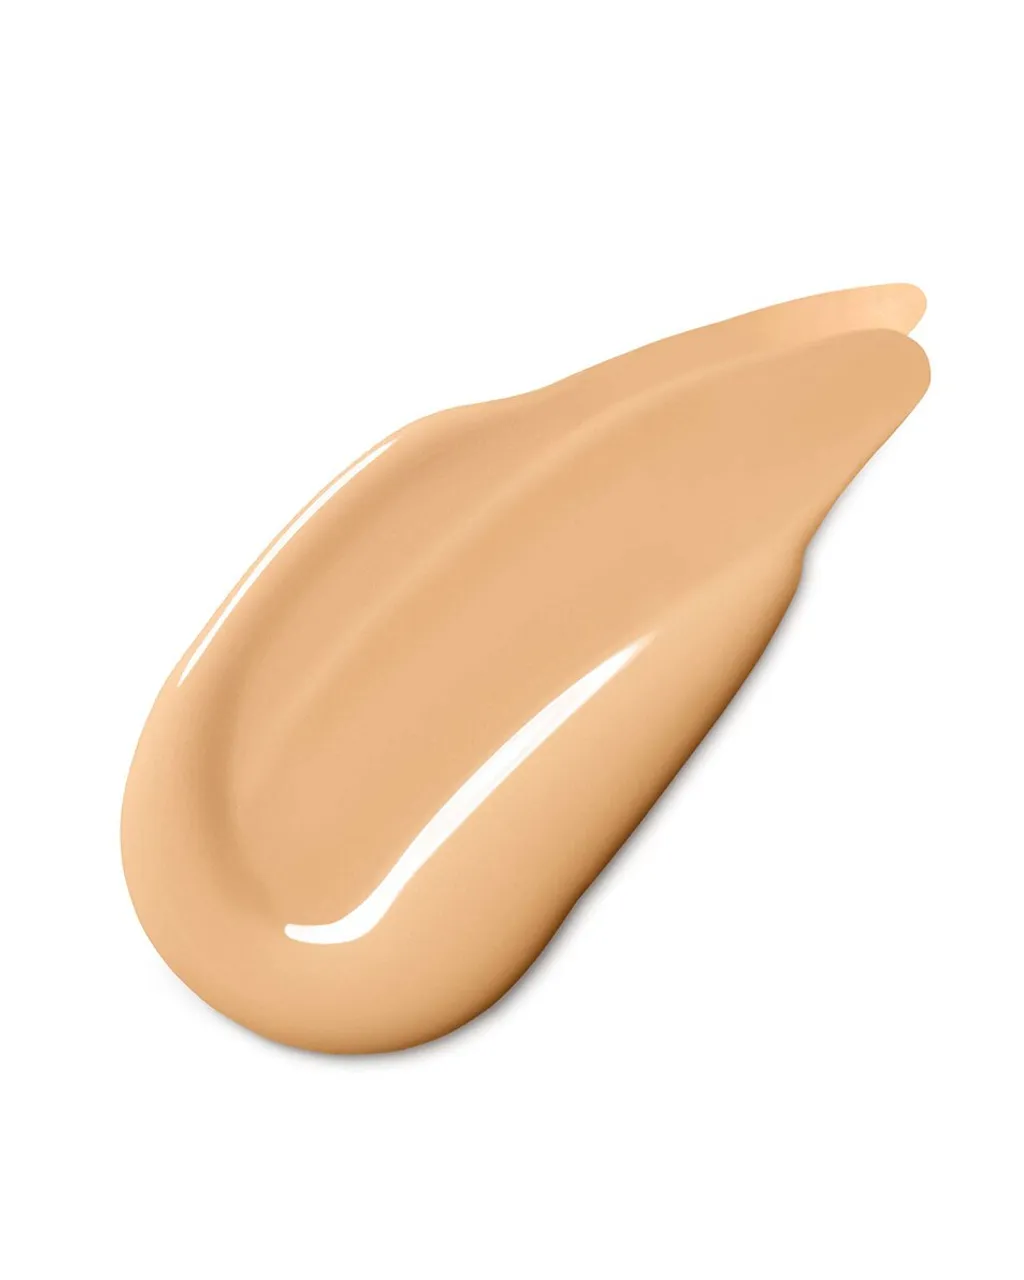 Clinique Even Better™ Clinical Serum Foundation HYDRATERENDE &